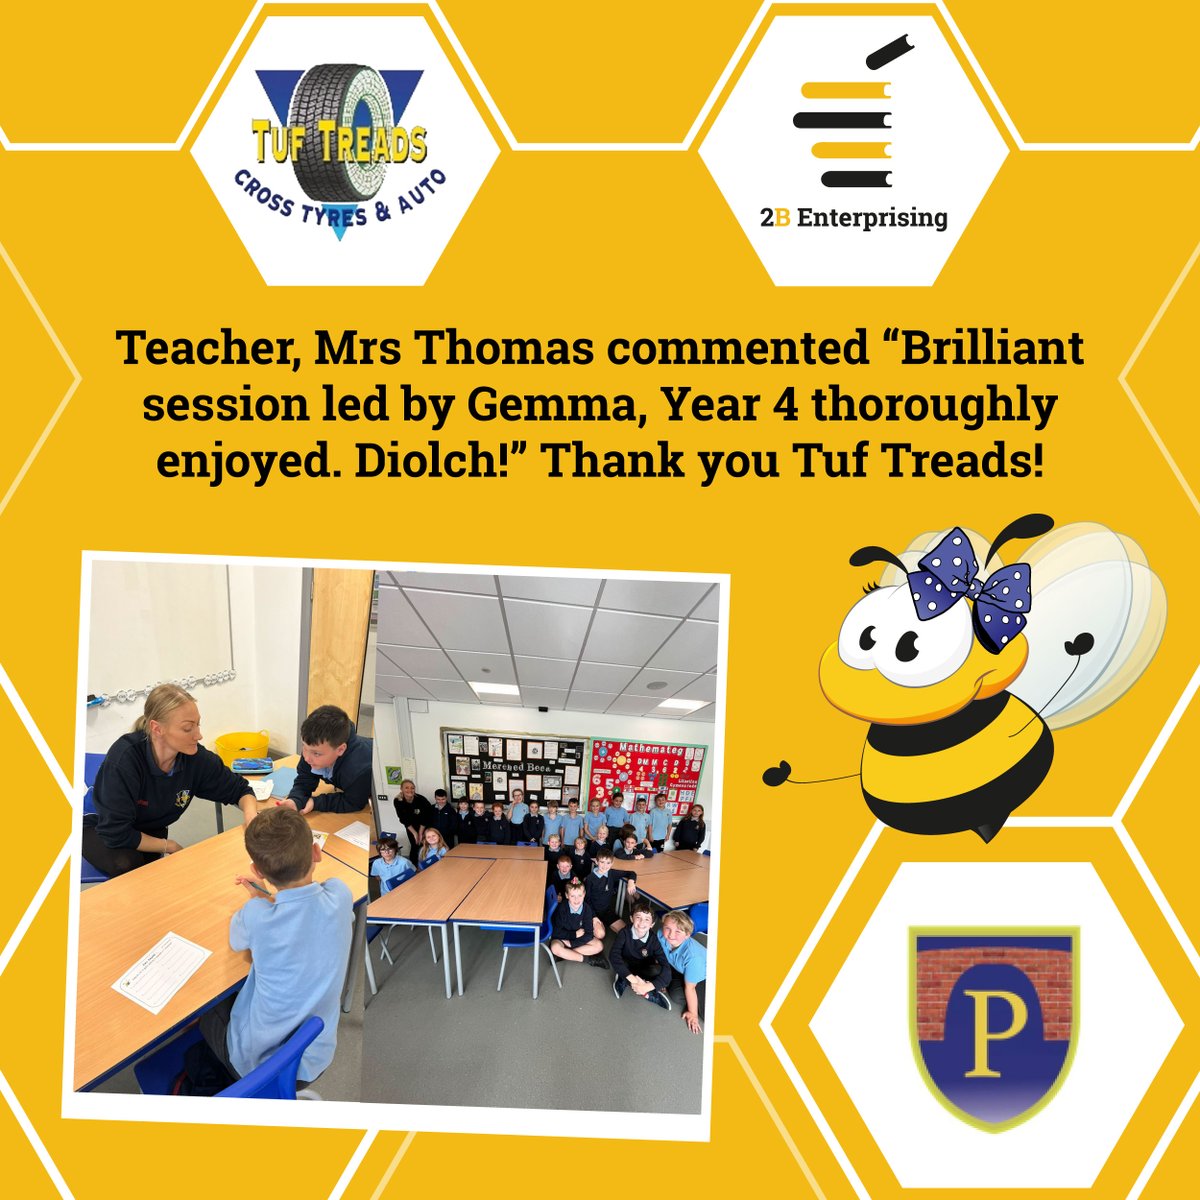 Thank you to @tuftreads new #BusinessPartners for joining the Exciting World of Work session at @YsgolPontyberem great feedback from the teacher! 🐝
#Careers #PrimaryEducation #EnterpriseSkills